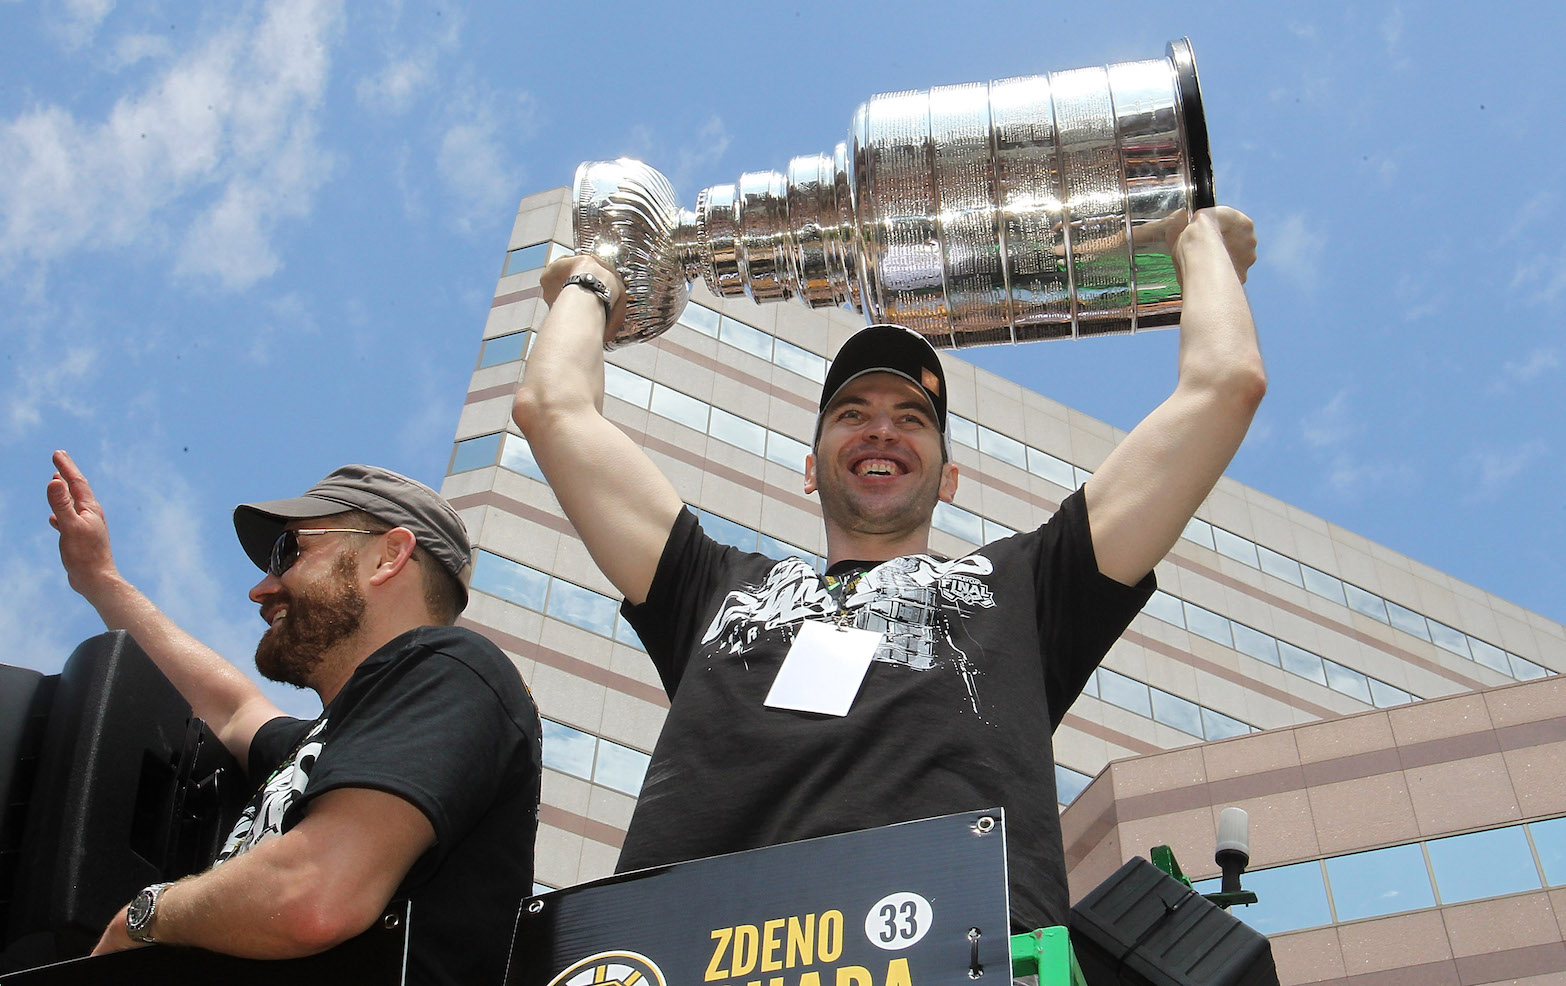 BOSTON, MA - JUNE 18:Tim Thomas and Zdeno Chara, both of the Boston Bruins, reacts to cheers a Stanley Cup victory parade on June 18, 2011 in Boston, Massachusetts. (Photo by Jim Rogash/Getty Images)